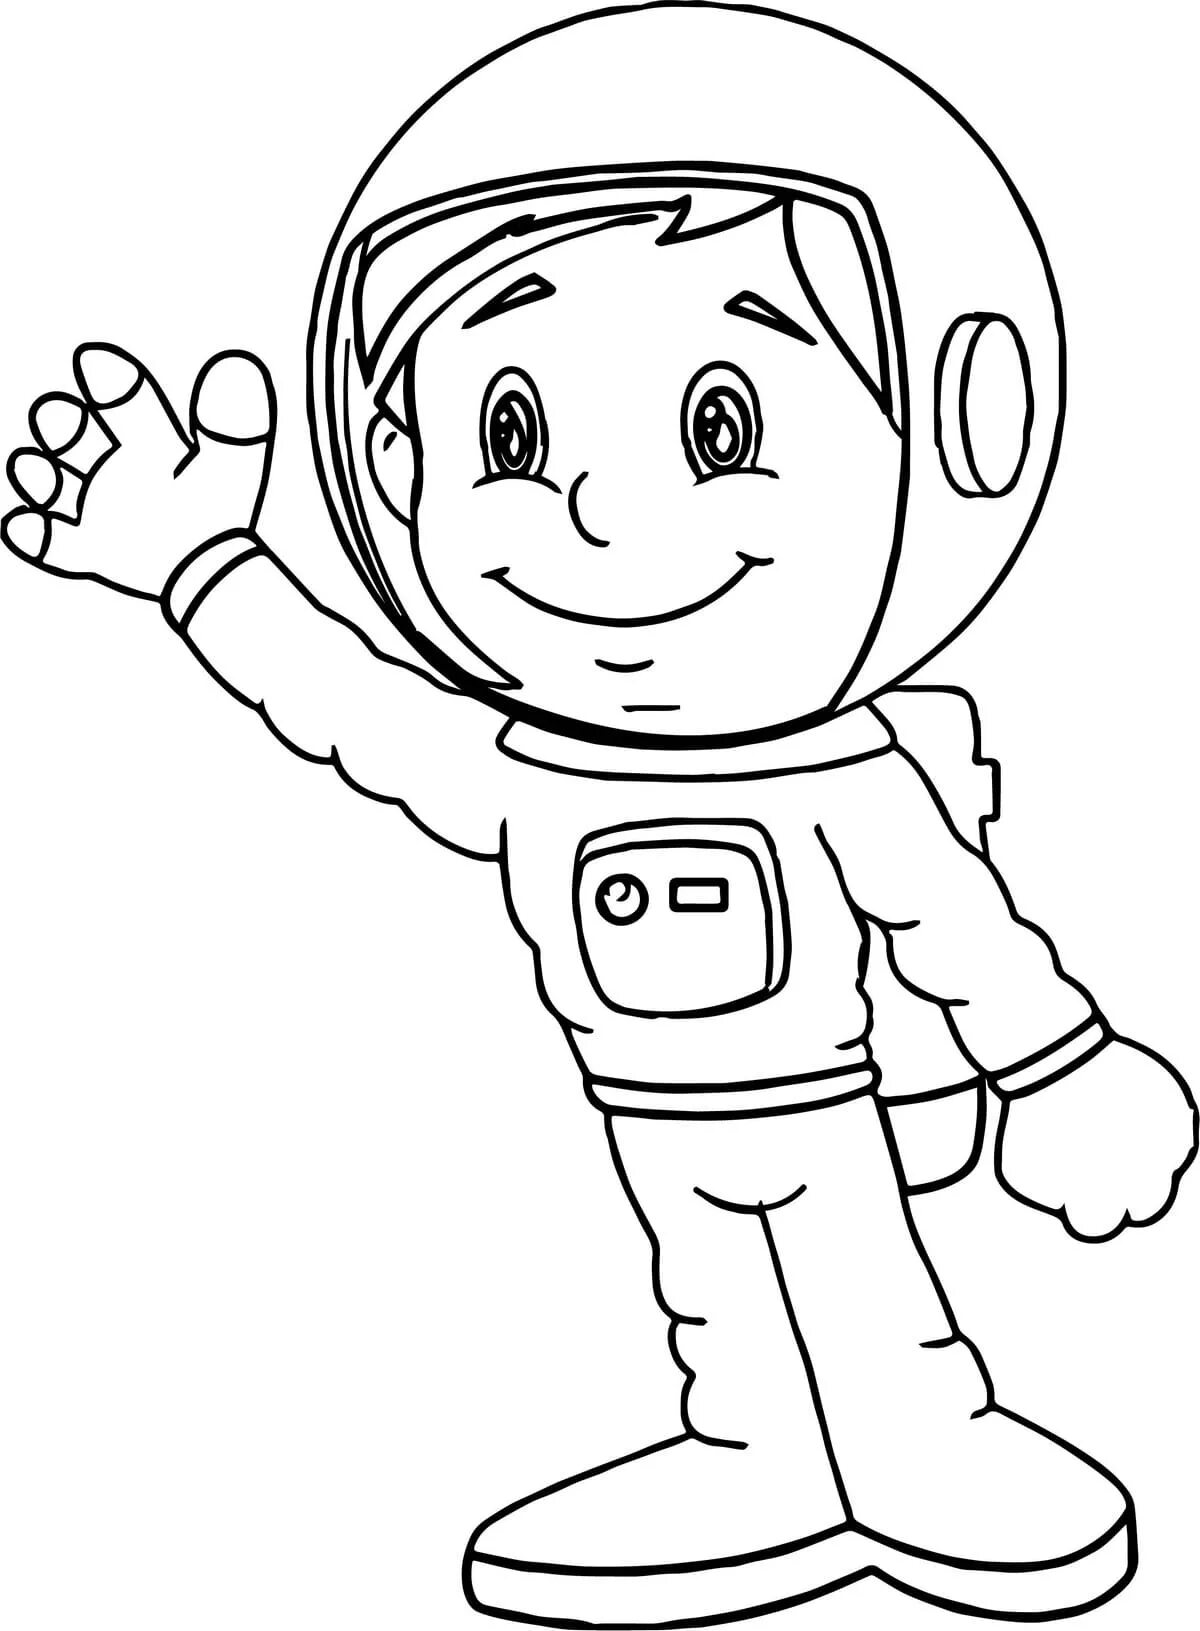 Spaceman in space suit #3